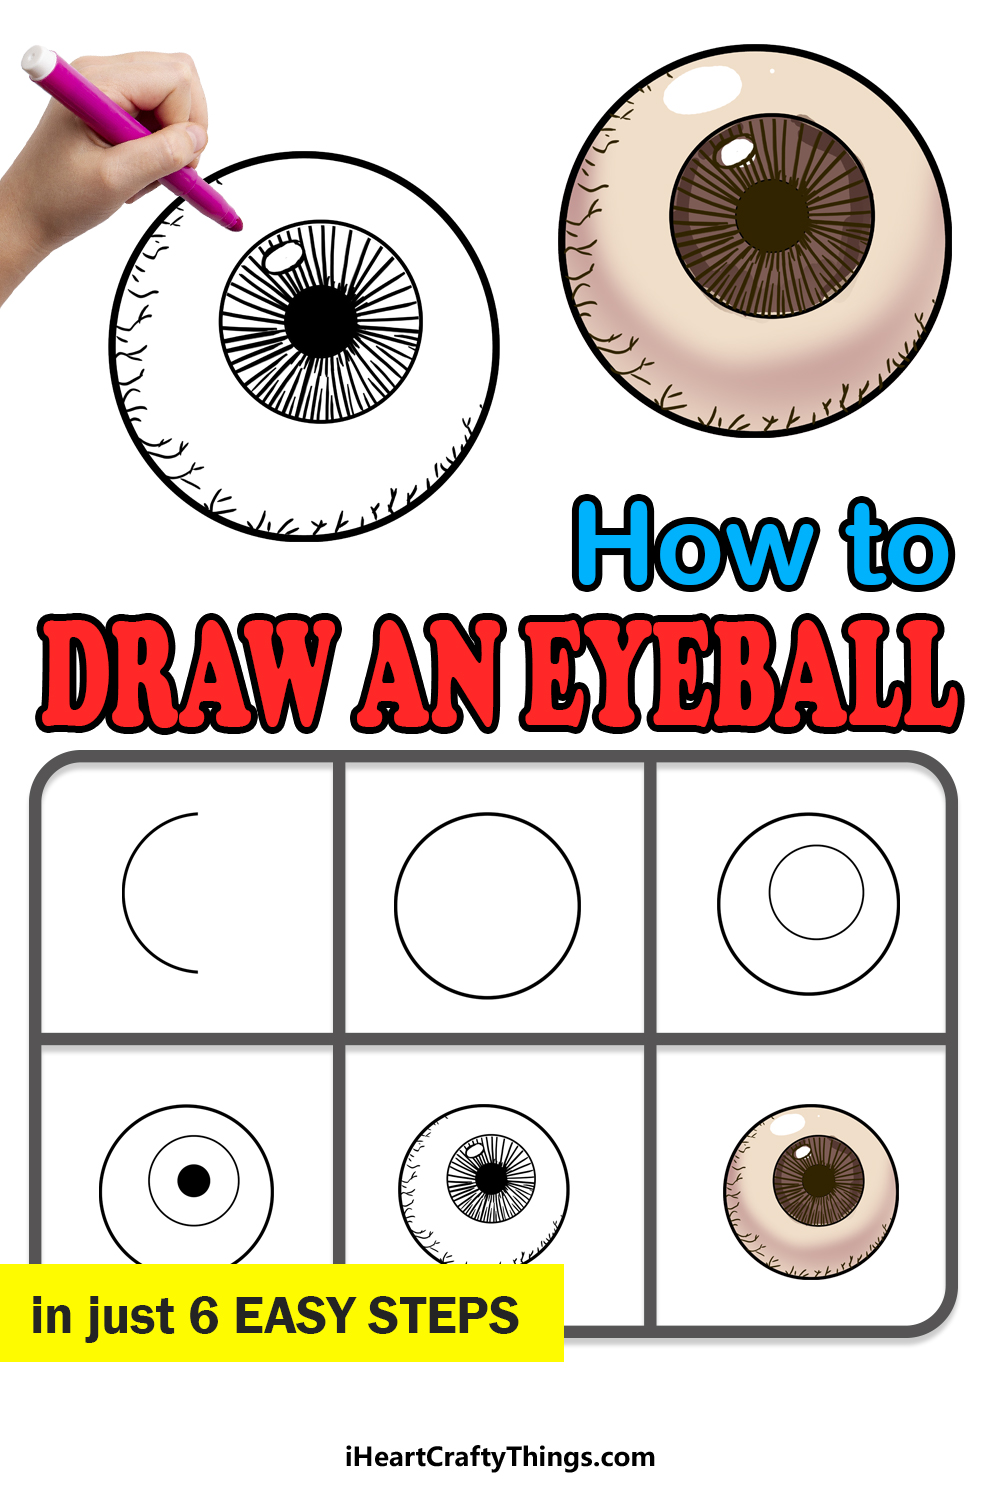 How to Draw An Eyeball step by step guide